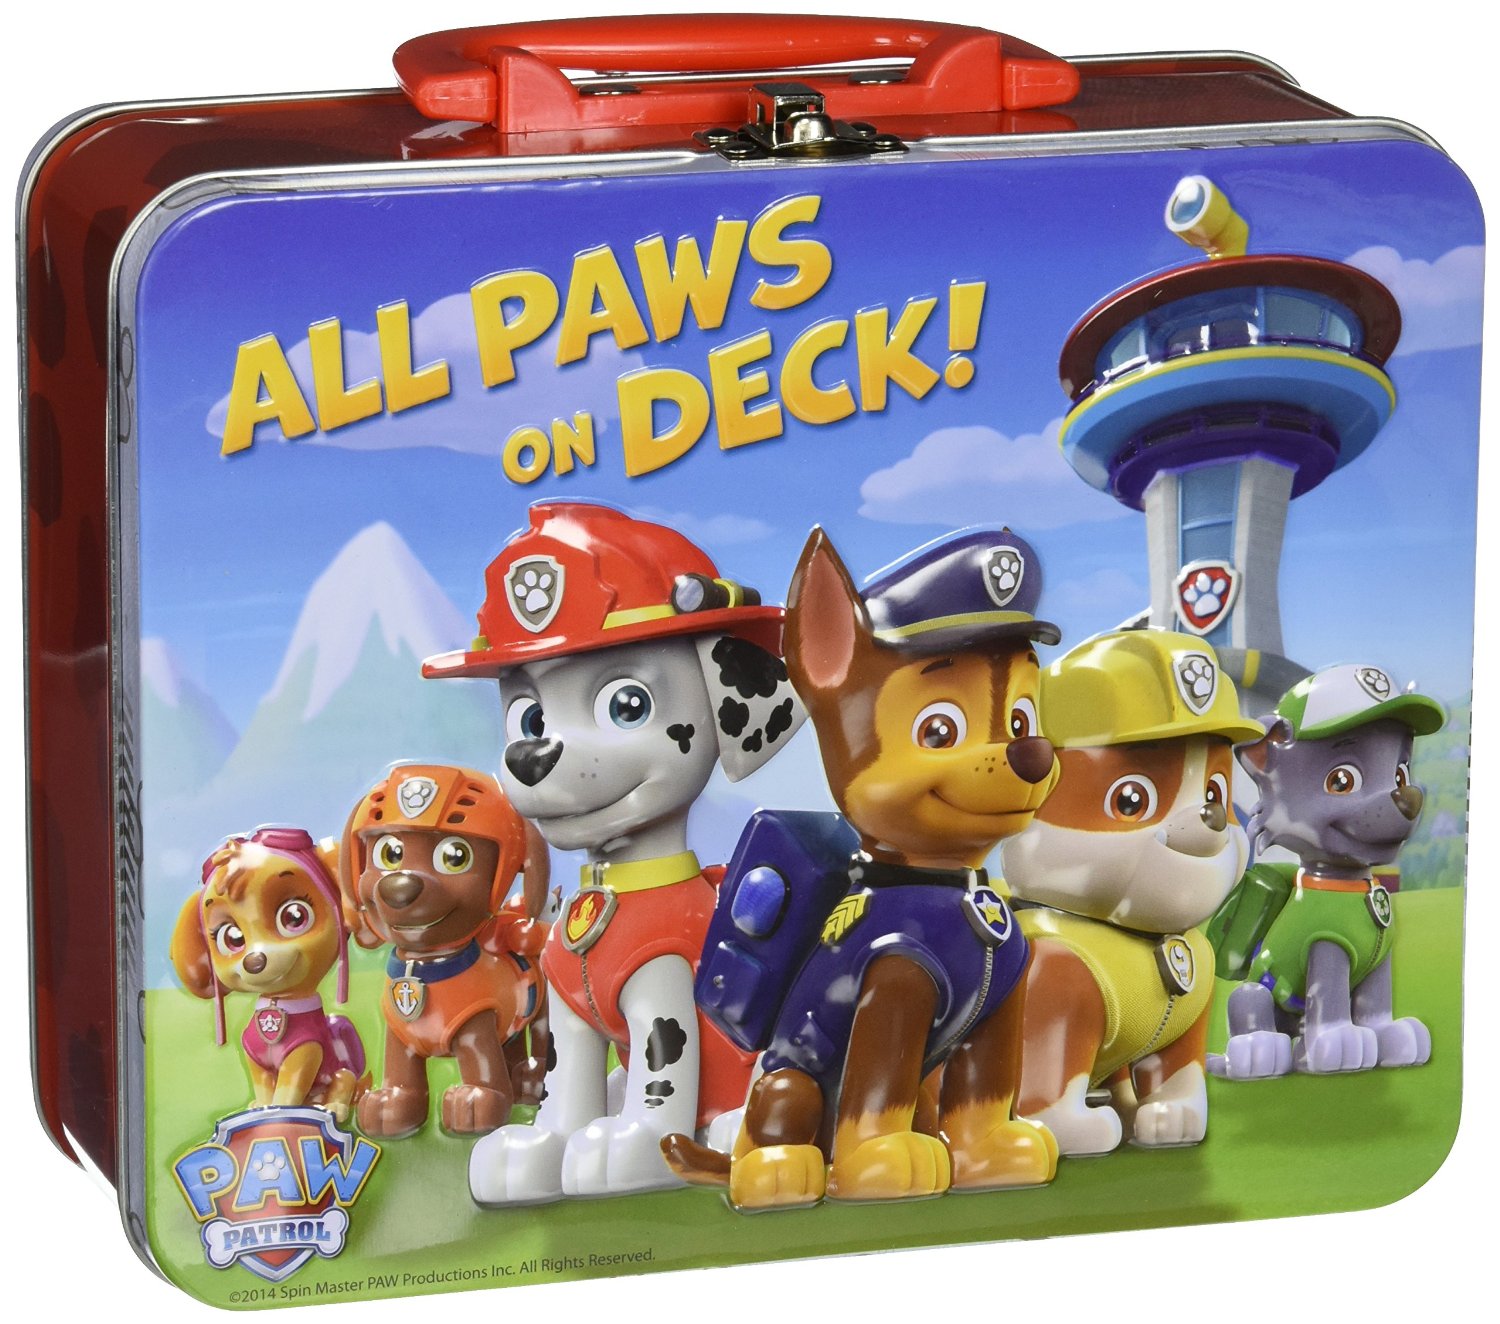 All Paws on Deck Paw Patrol Puzzle in Tin – Just $6.56!